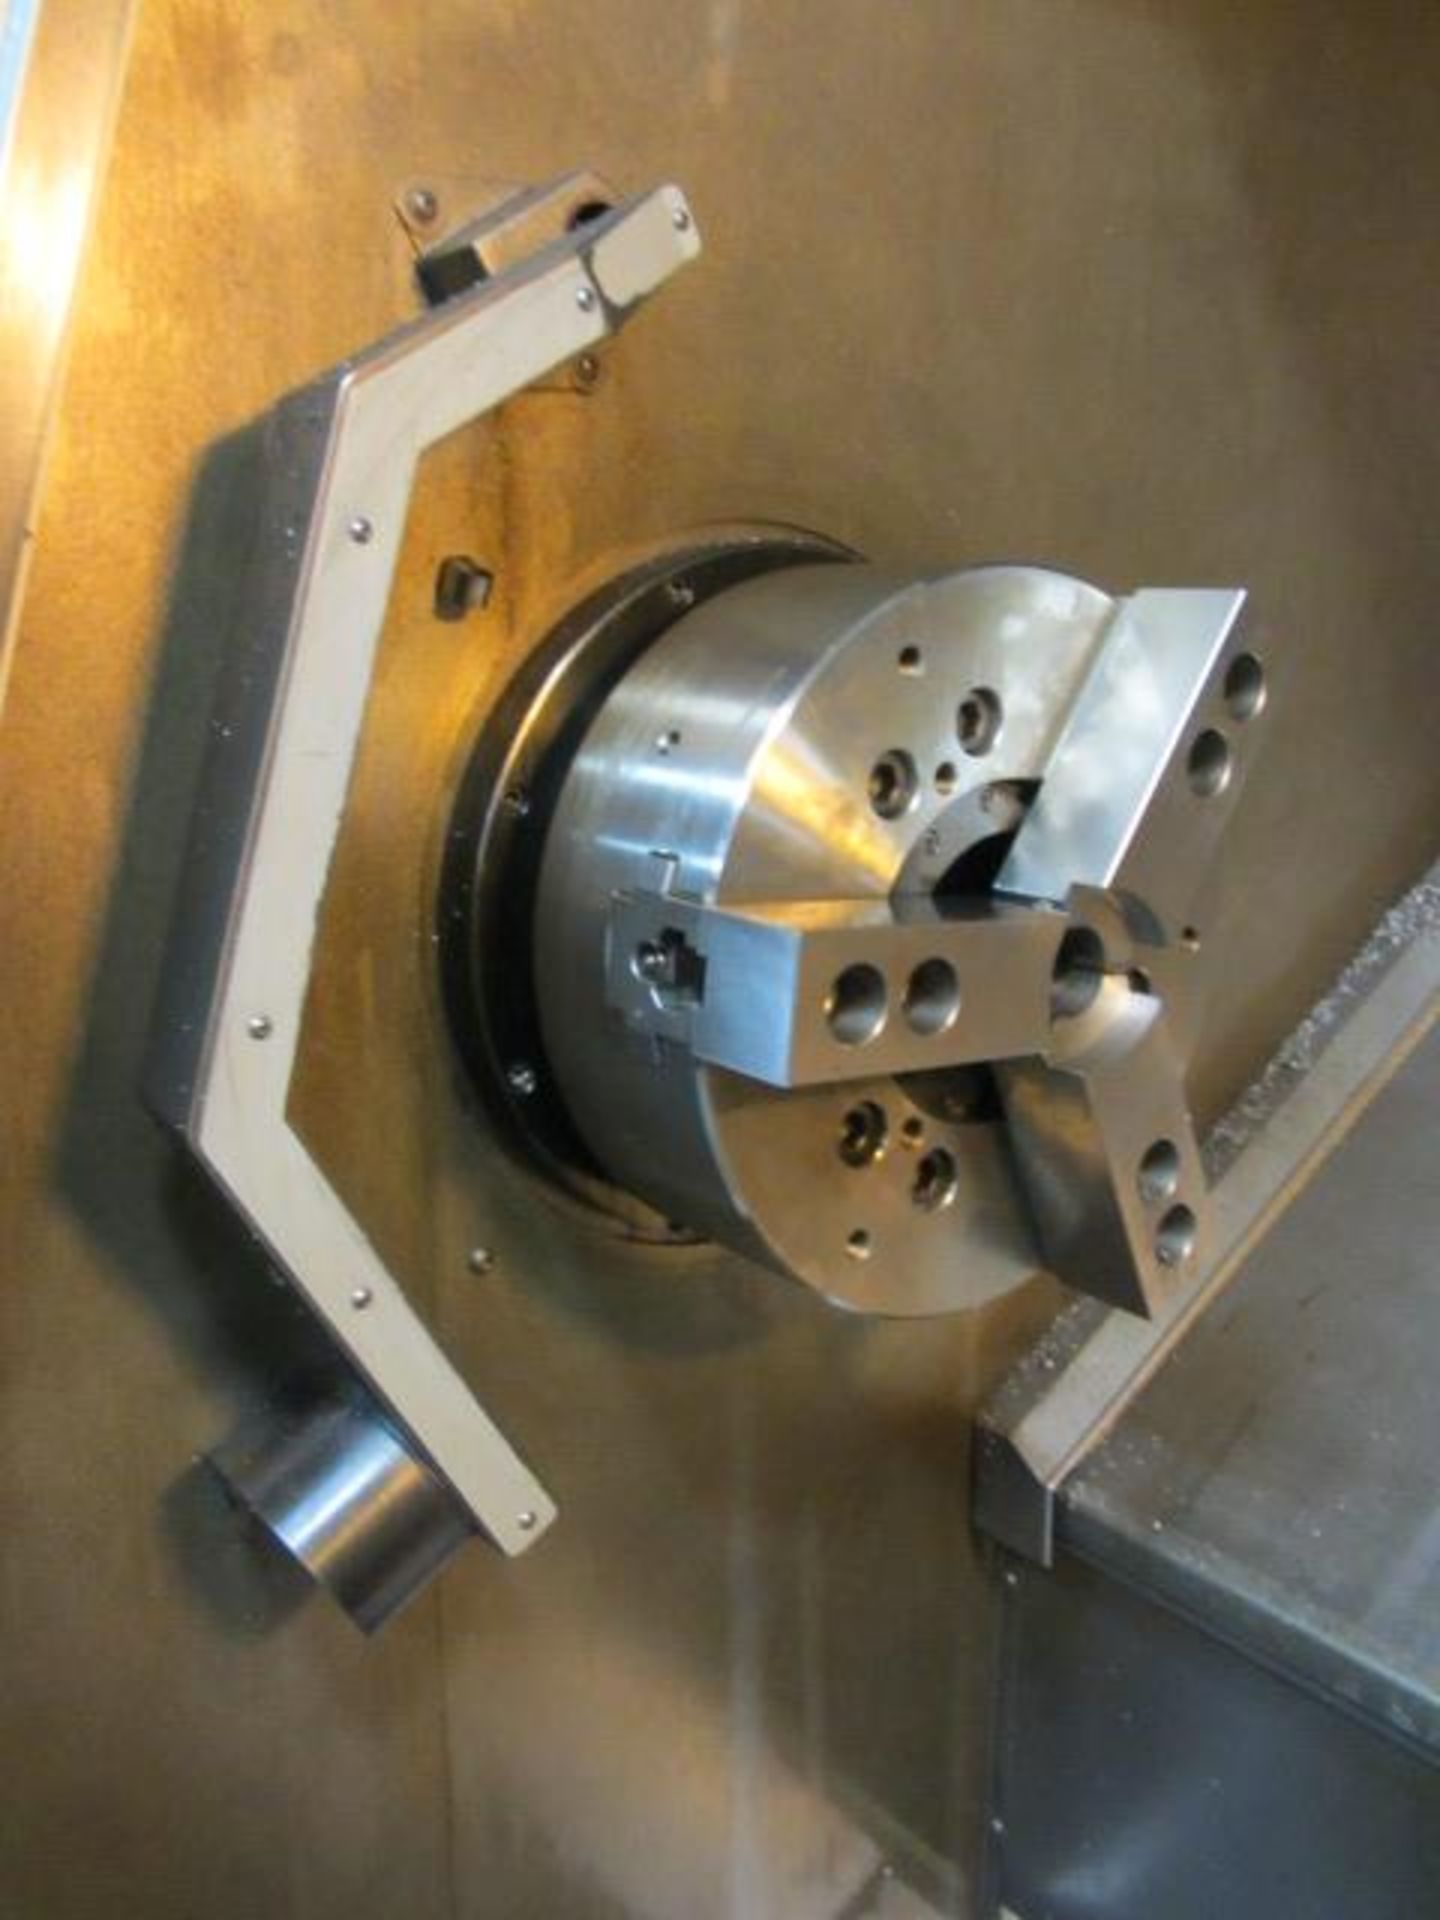 Haas SL40 CNC Turning Center with 15'' 3-Jaw Power Chuck, 4-1/2'' Bore, Approx 70'' Max Distance - Image 7 of 10